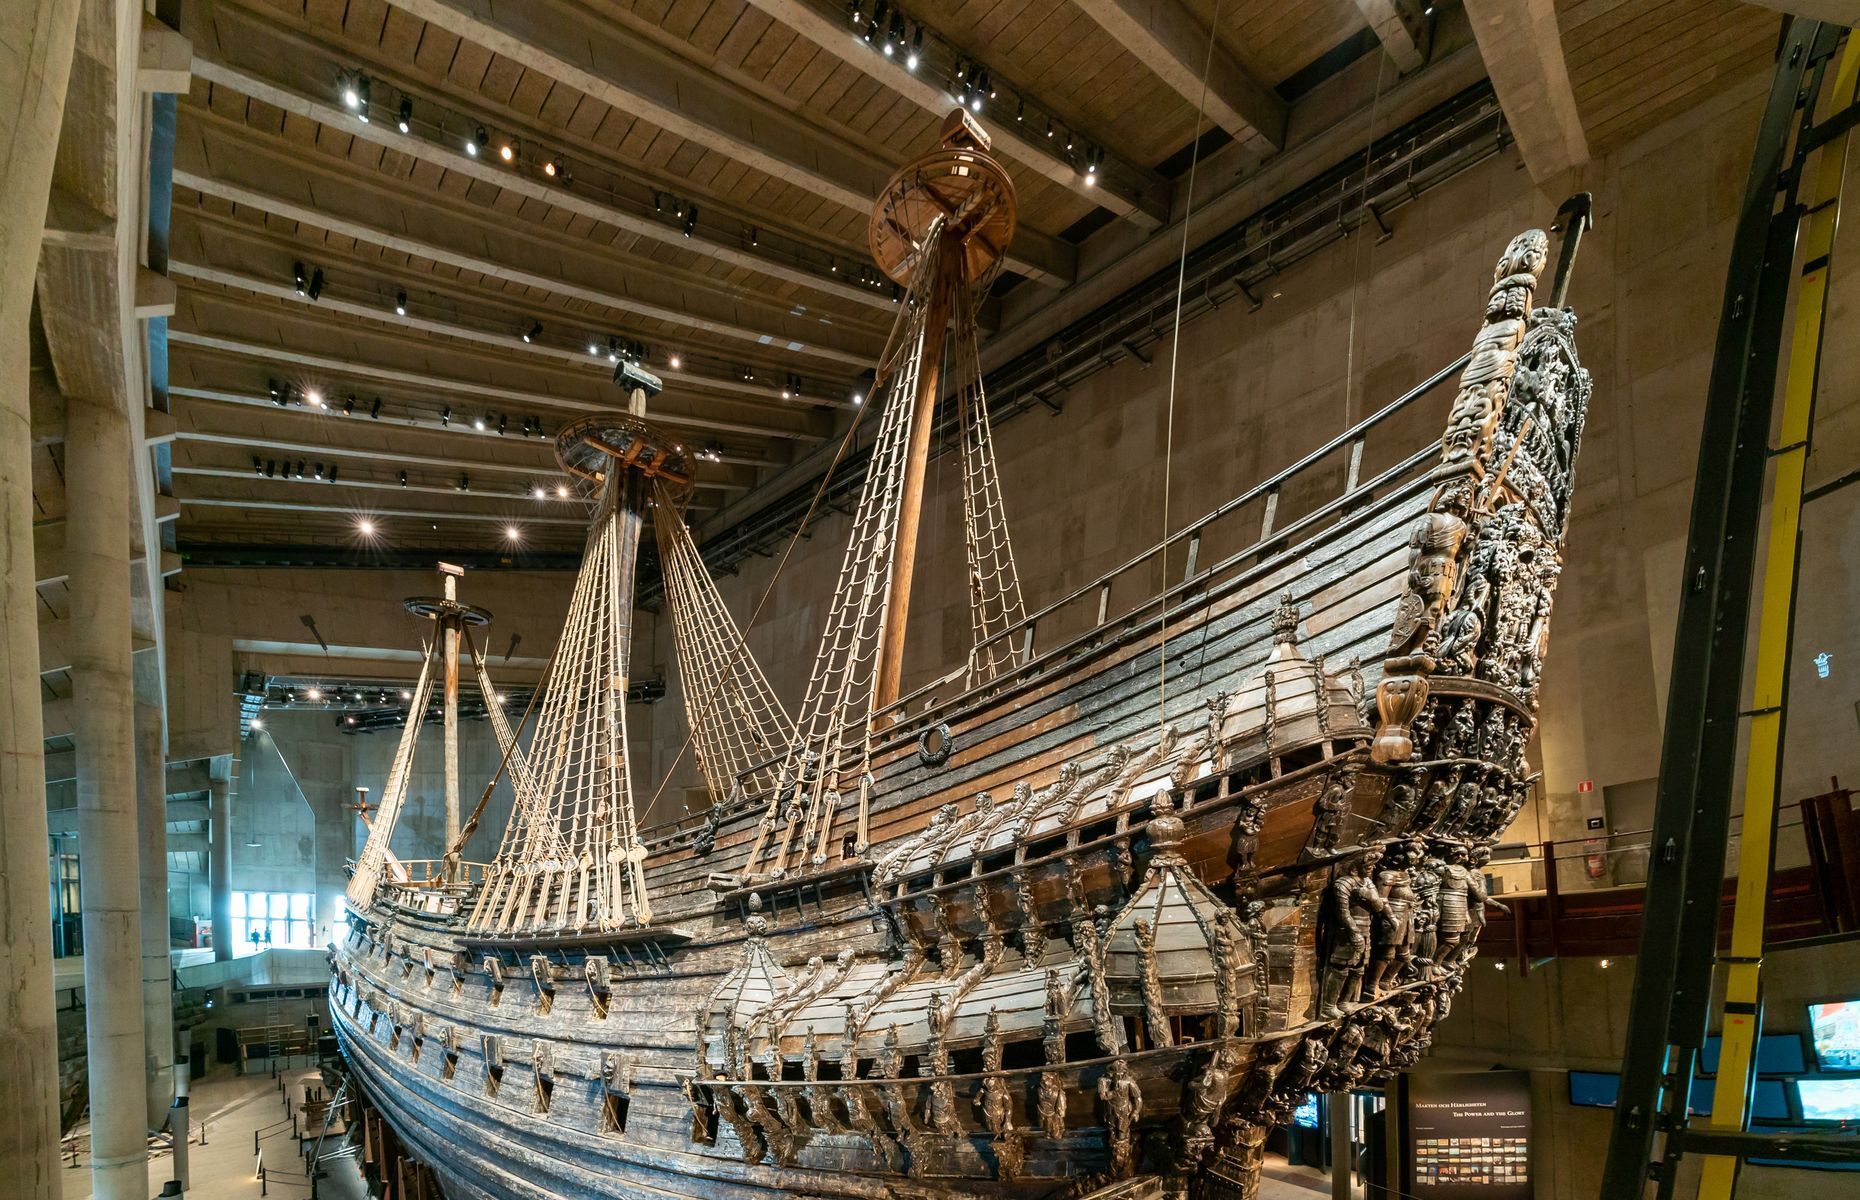 <p>Admired for its impressive preservation of a ship after which it’s named, the <a href="https://www.vasamuseet.se/en" rel="noreferrer noopener">Vasa</a> is one of the most visited museums in Scandinavia. After sinking near Stockholm in 1628, the huge ship spent more than 333 years underwater before being brought to the surface and put on public display.</p>